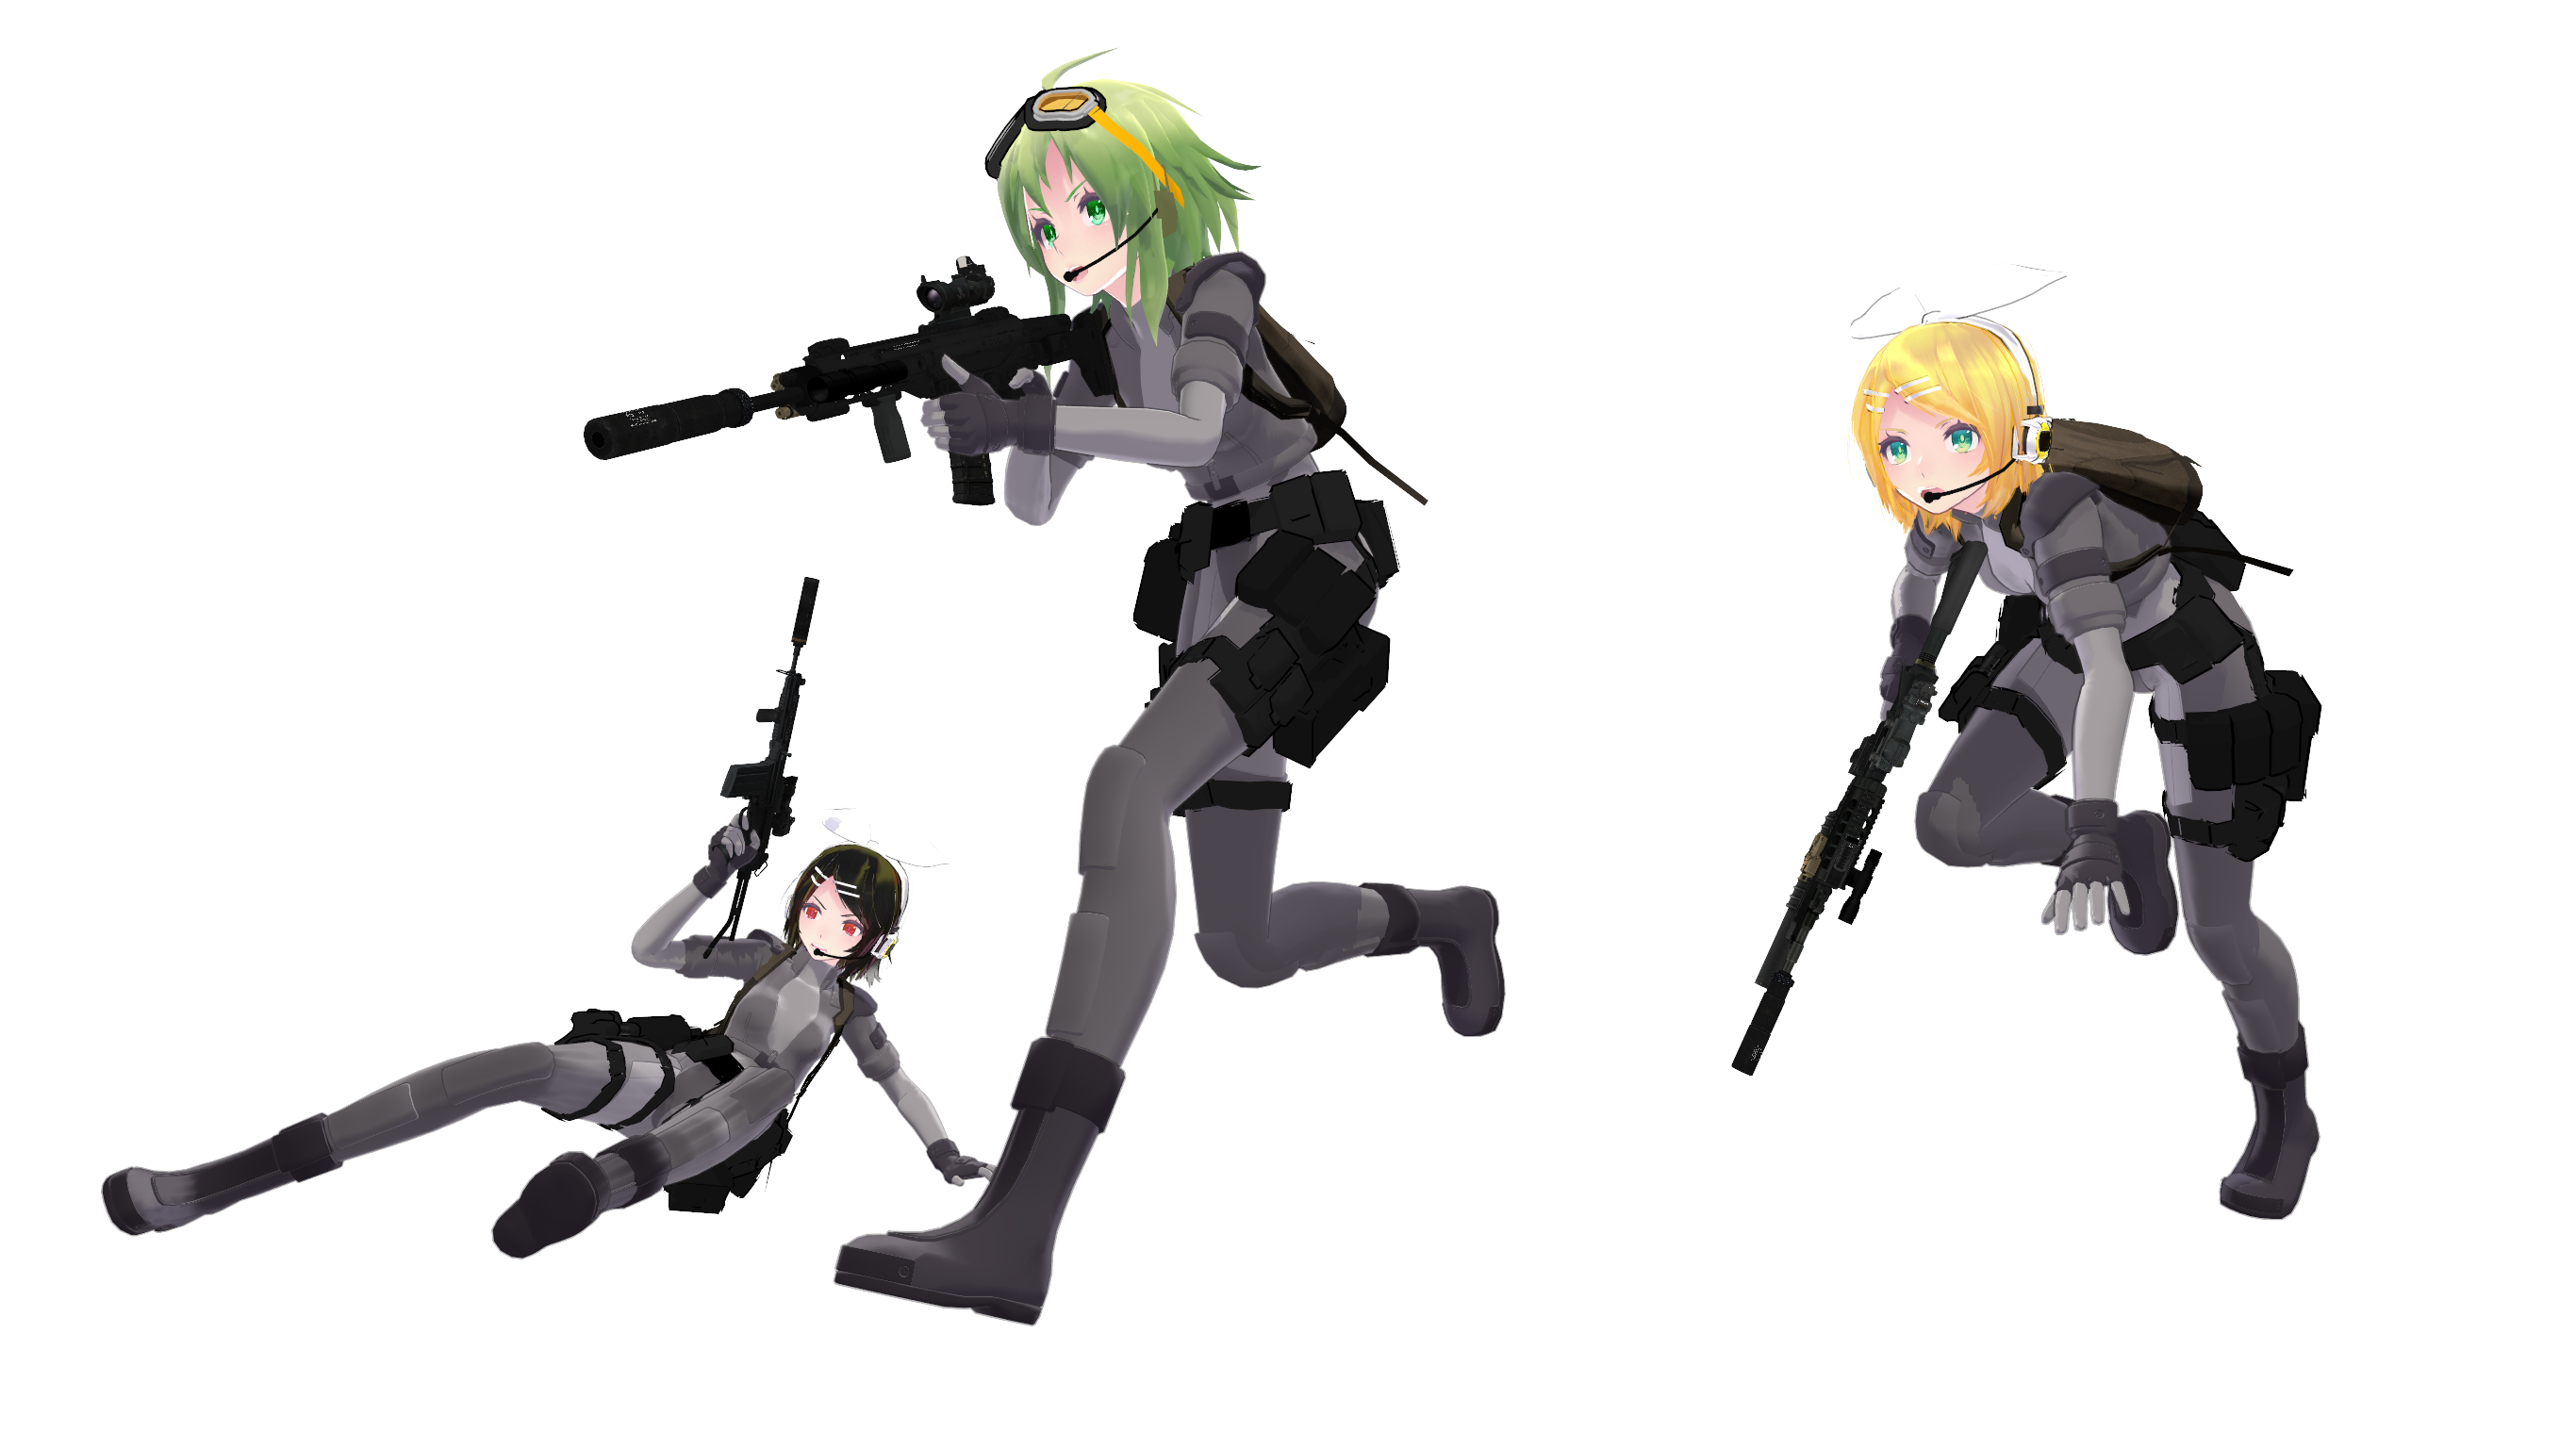 mmd_pose_with_gun_sharing__by_johneugene-d8xva97.png